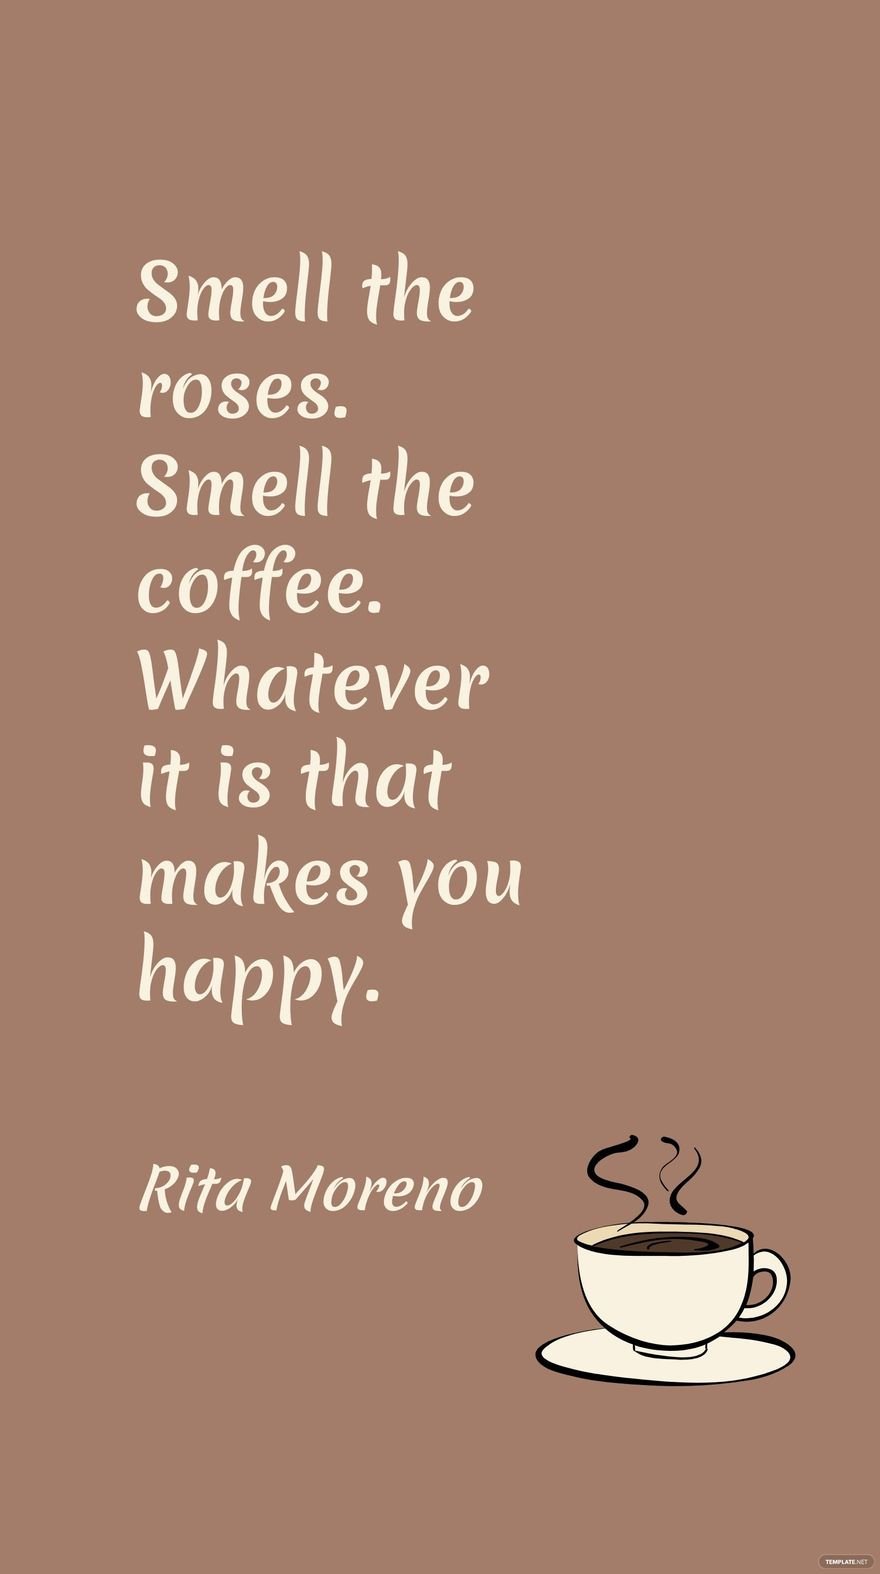 Free Rita Moreno - Smell the roses. Smell the coffee. Whatever it is that makes you happy. in JPG